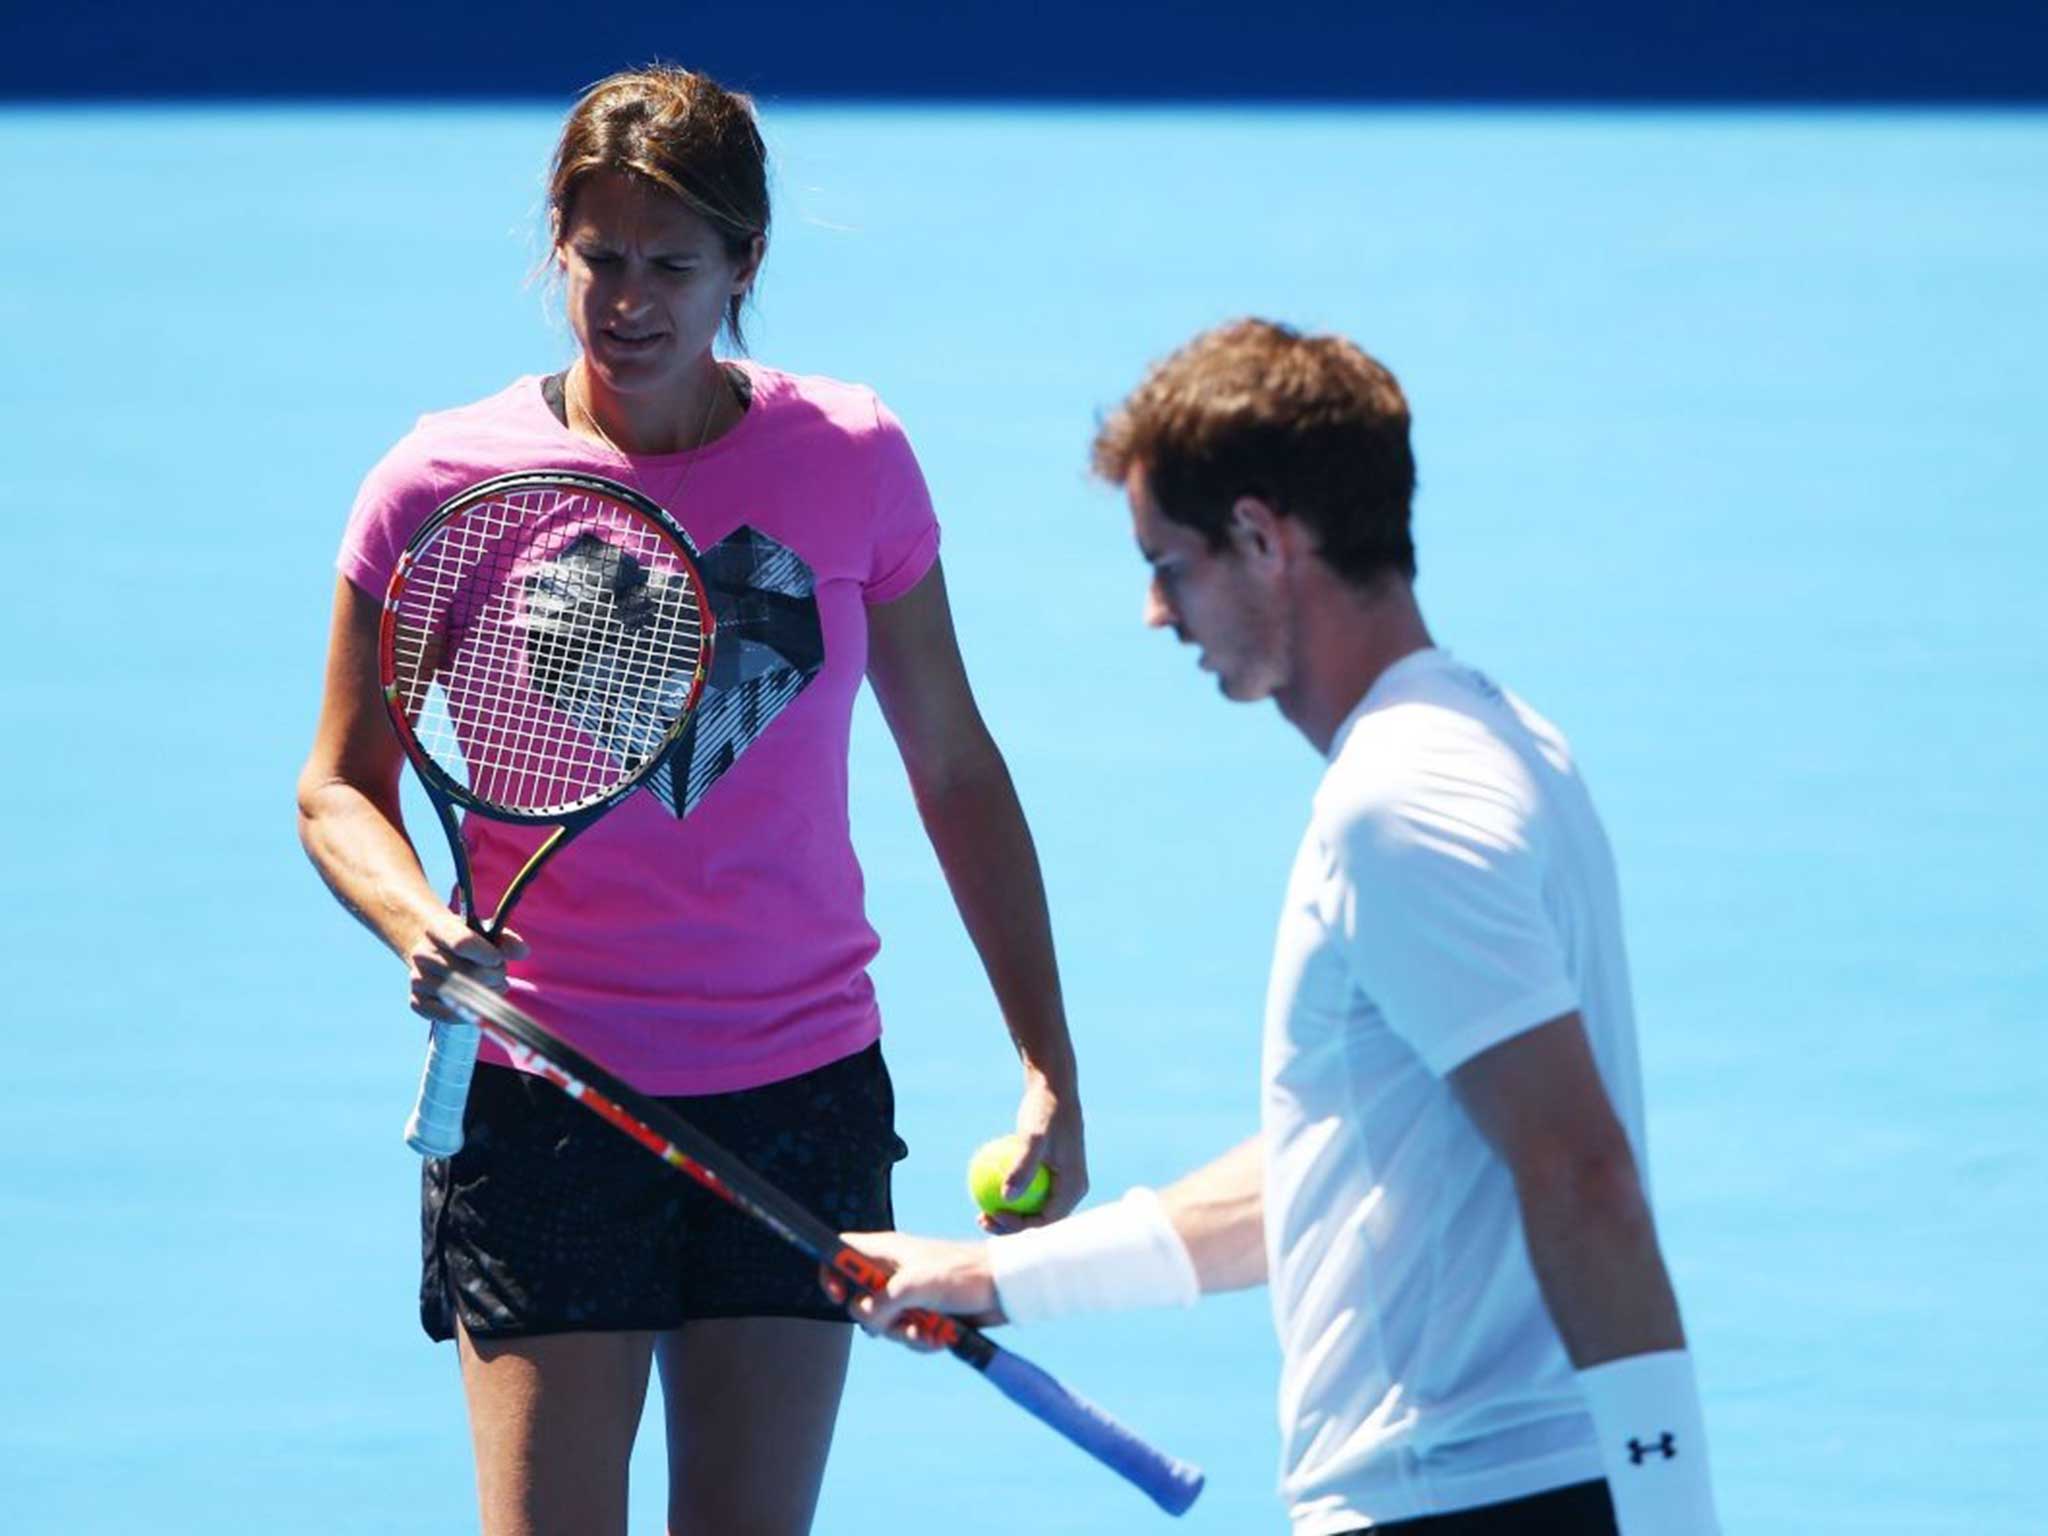 Andy Murray’s recent form has seemed dependent on the presence of coach Amélie Mauresmo